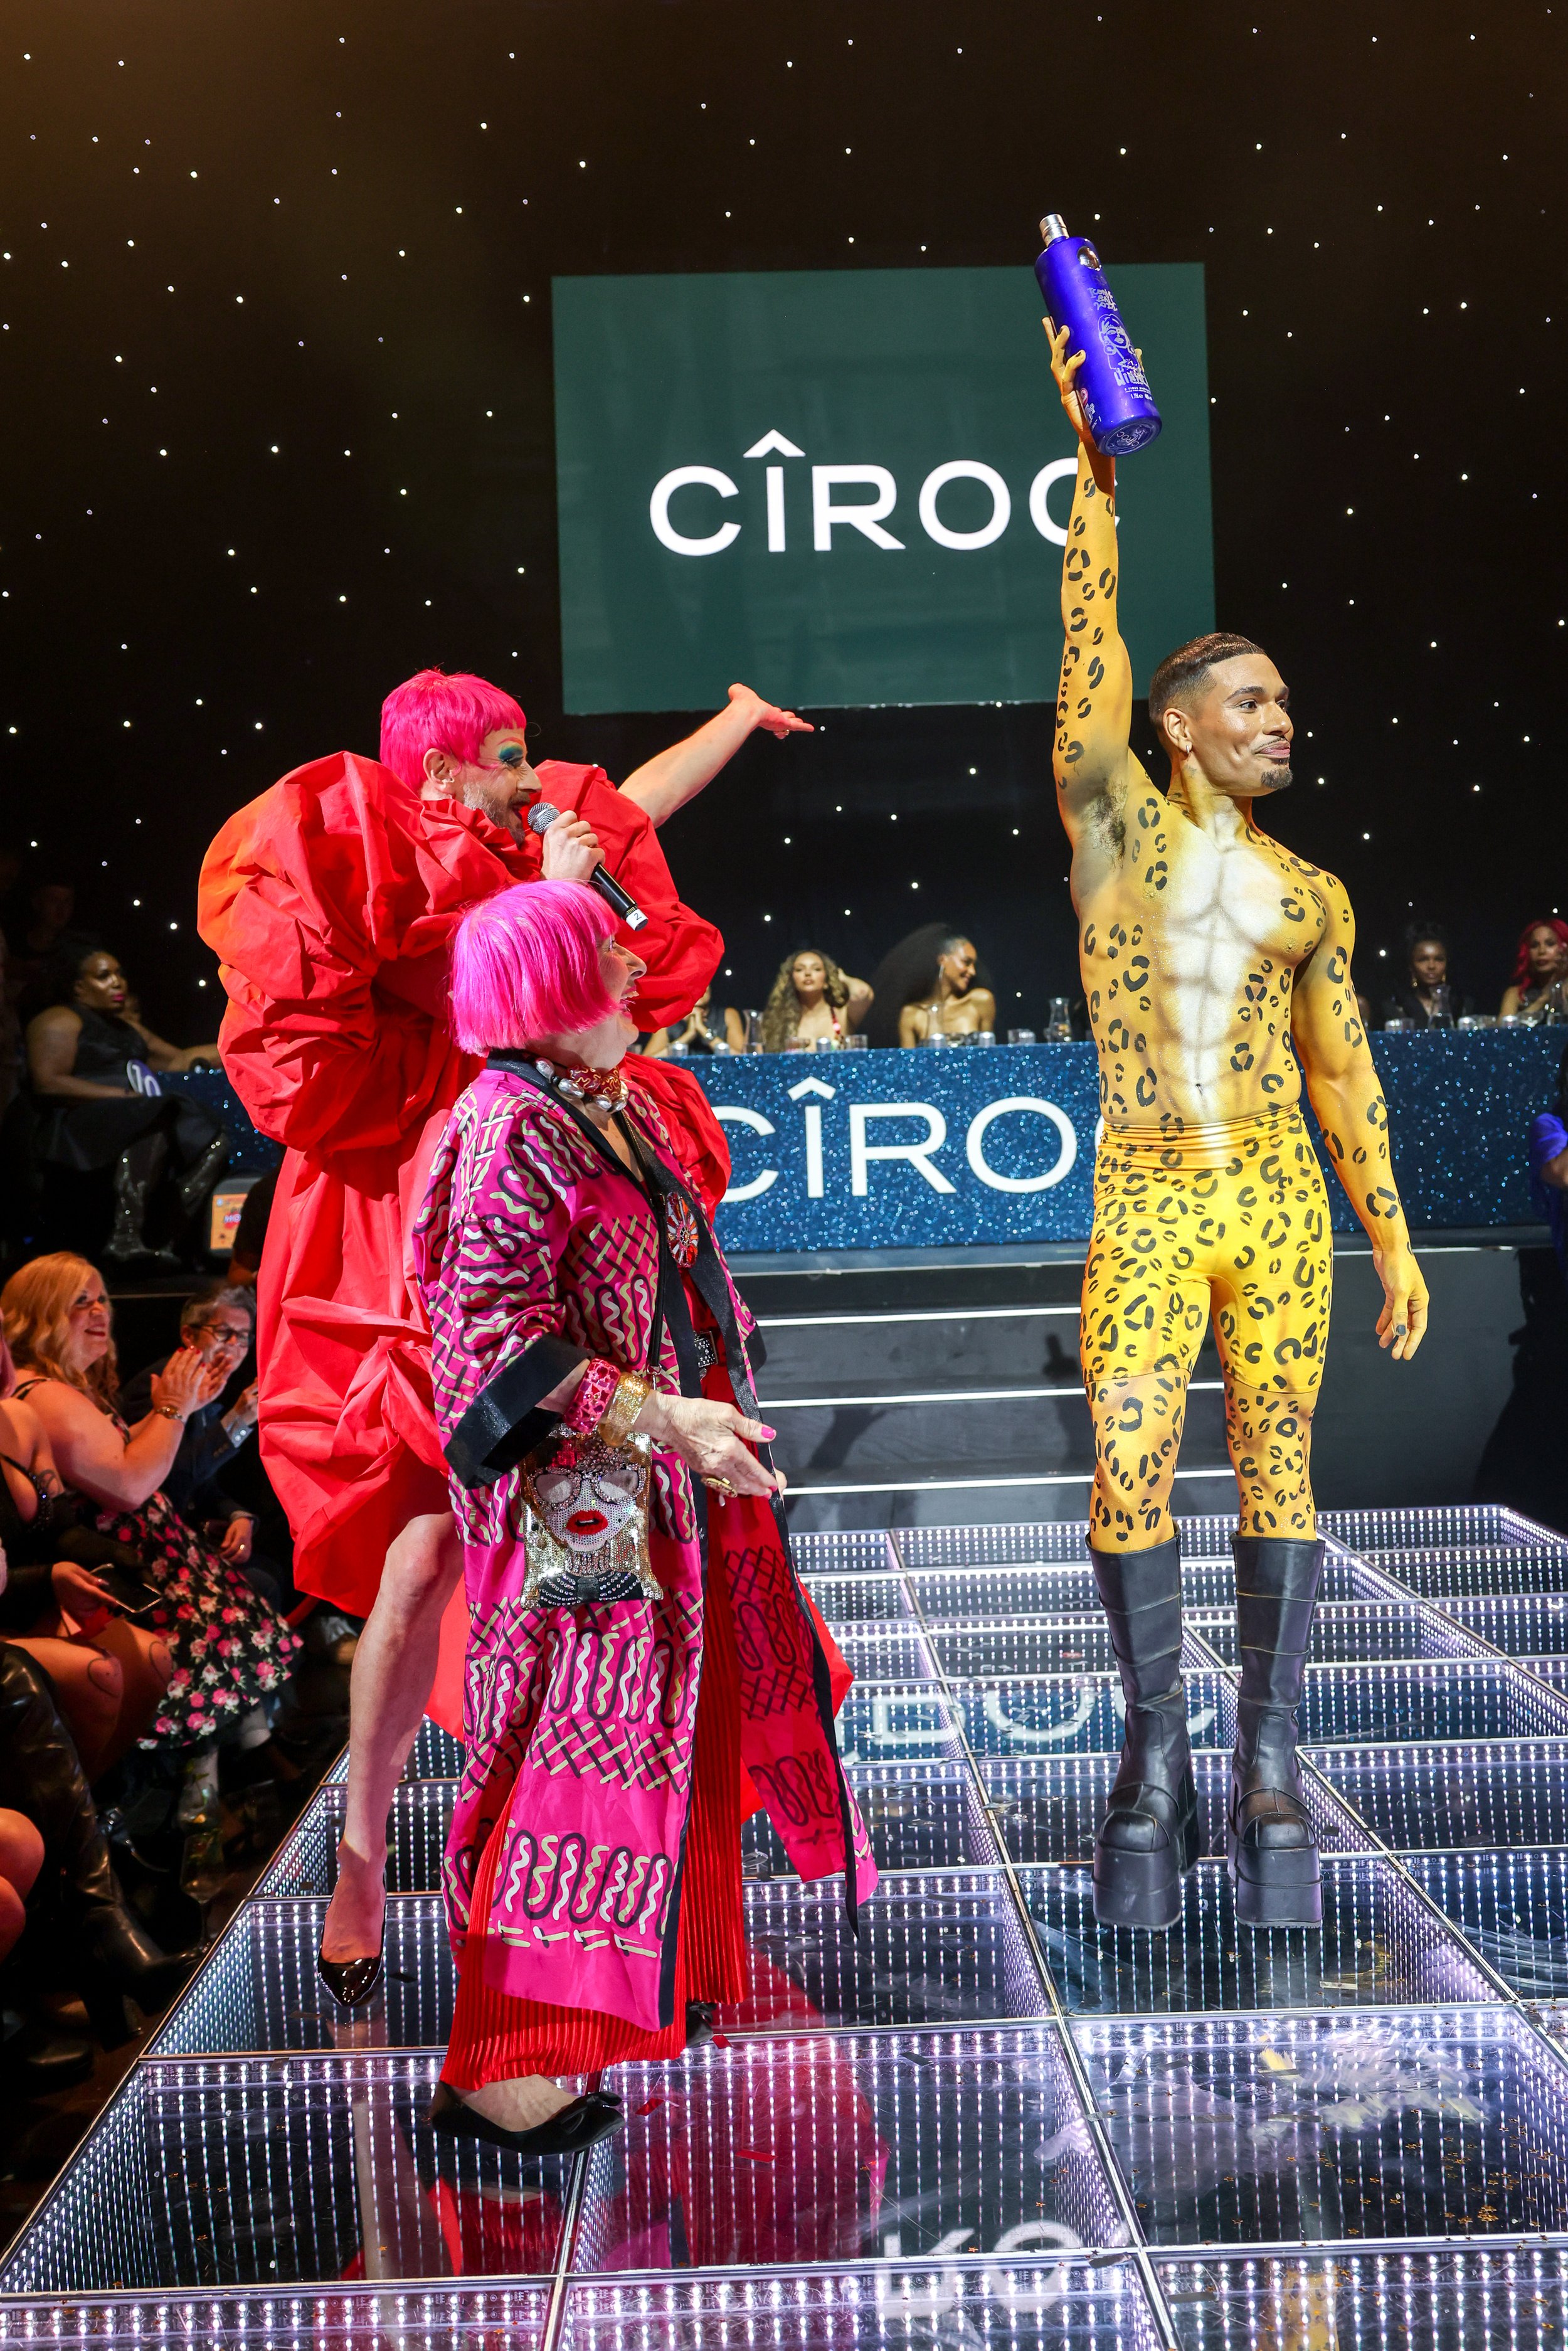  LONDON, ENGLAND - JUNE 30: Dame Zandra Rhodes and Jonny Woo attend the CÎROC Iconic Ball in support of Not A Phase at KOKO on June 30, 2022 in London, England. Today, the first ever CÎROC Iconic Ball brought the house down at legendary KOKO Camden i